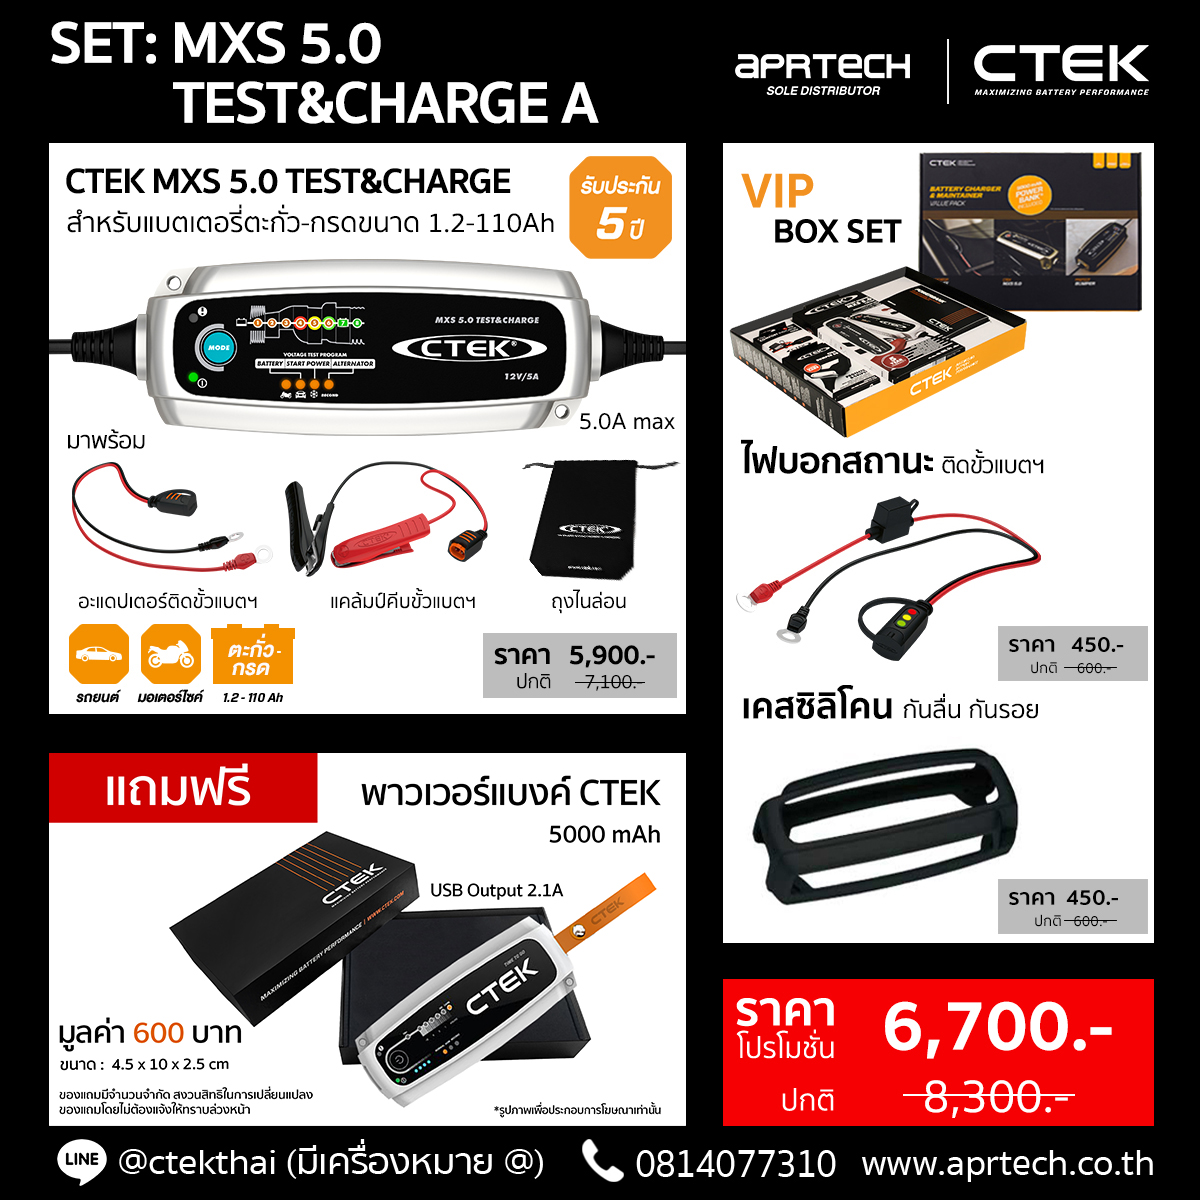 SET MXS 5.0 TEST&CHARGE A (MXS 5.0 TEST&CHARGE + Indicator Eyelet + Bumper)